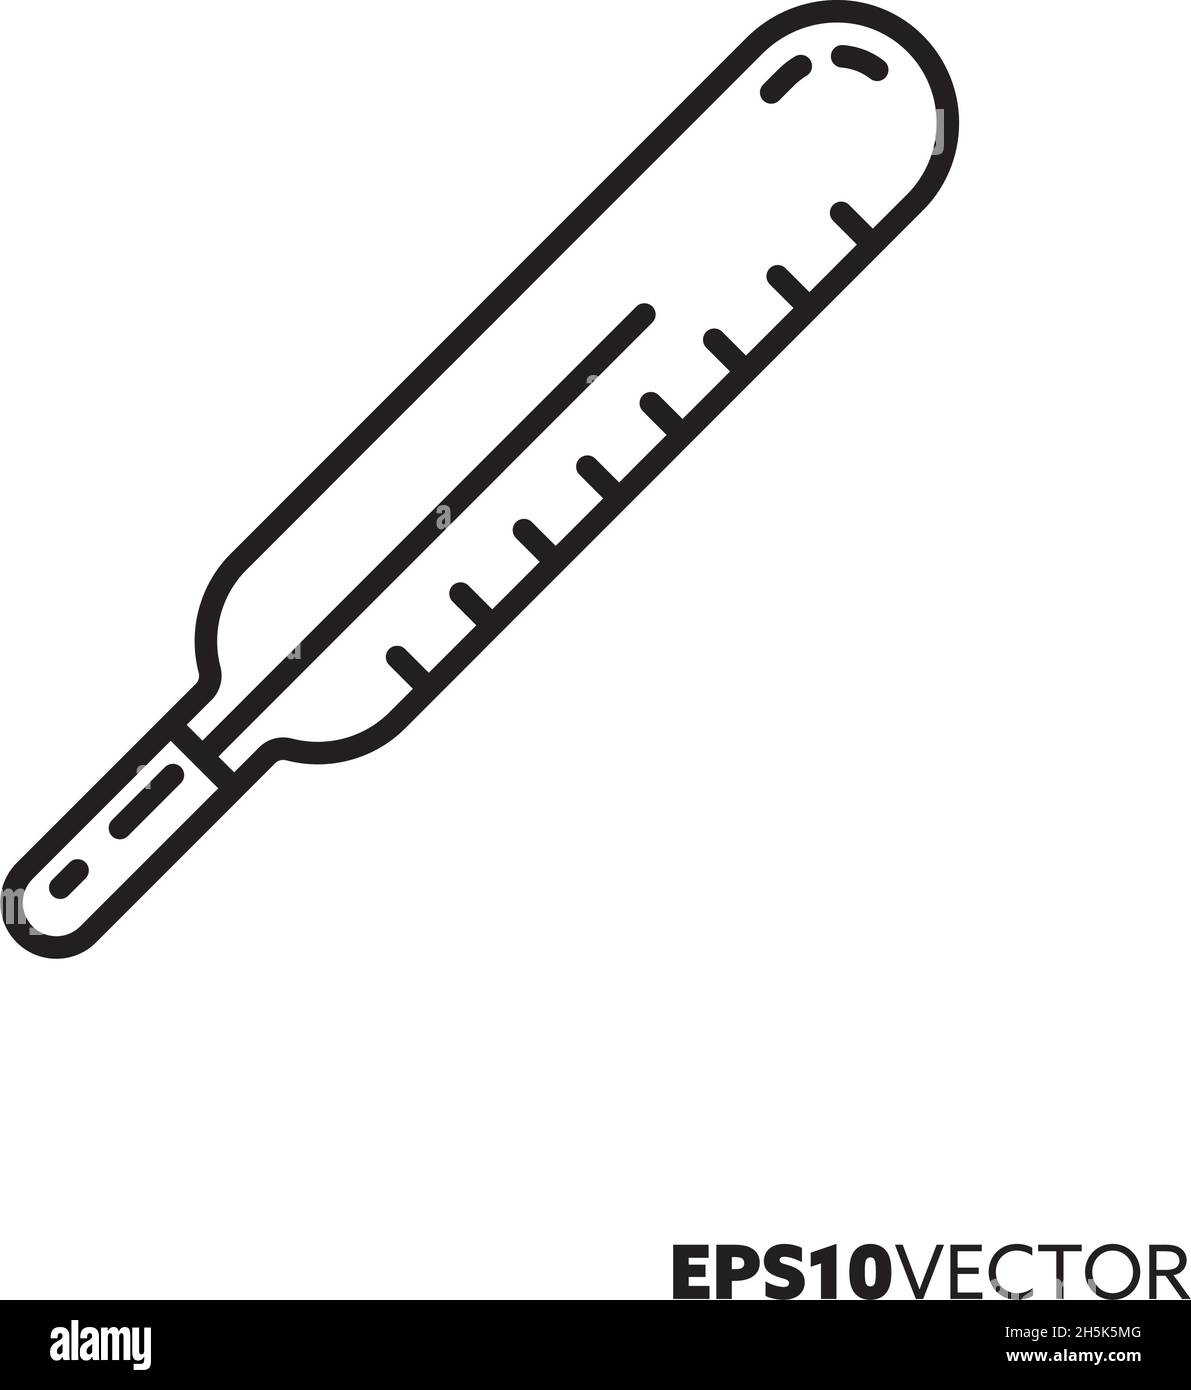 Analogue clinical thermometer line icon. Outline symbol of medical equipment. Health care and medicine concept flat vector illustration. Stock Vector